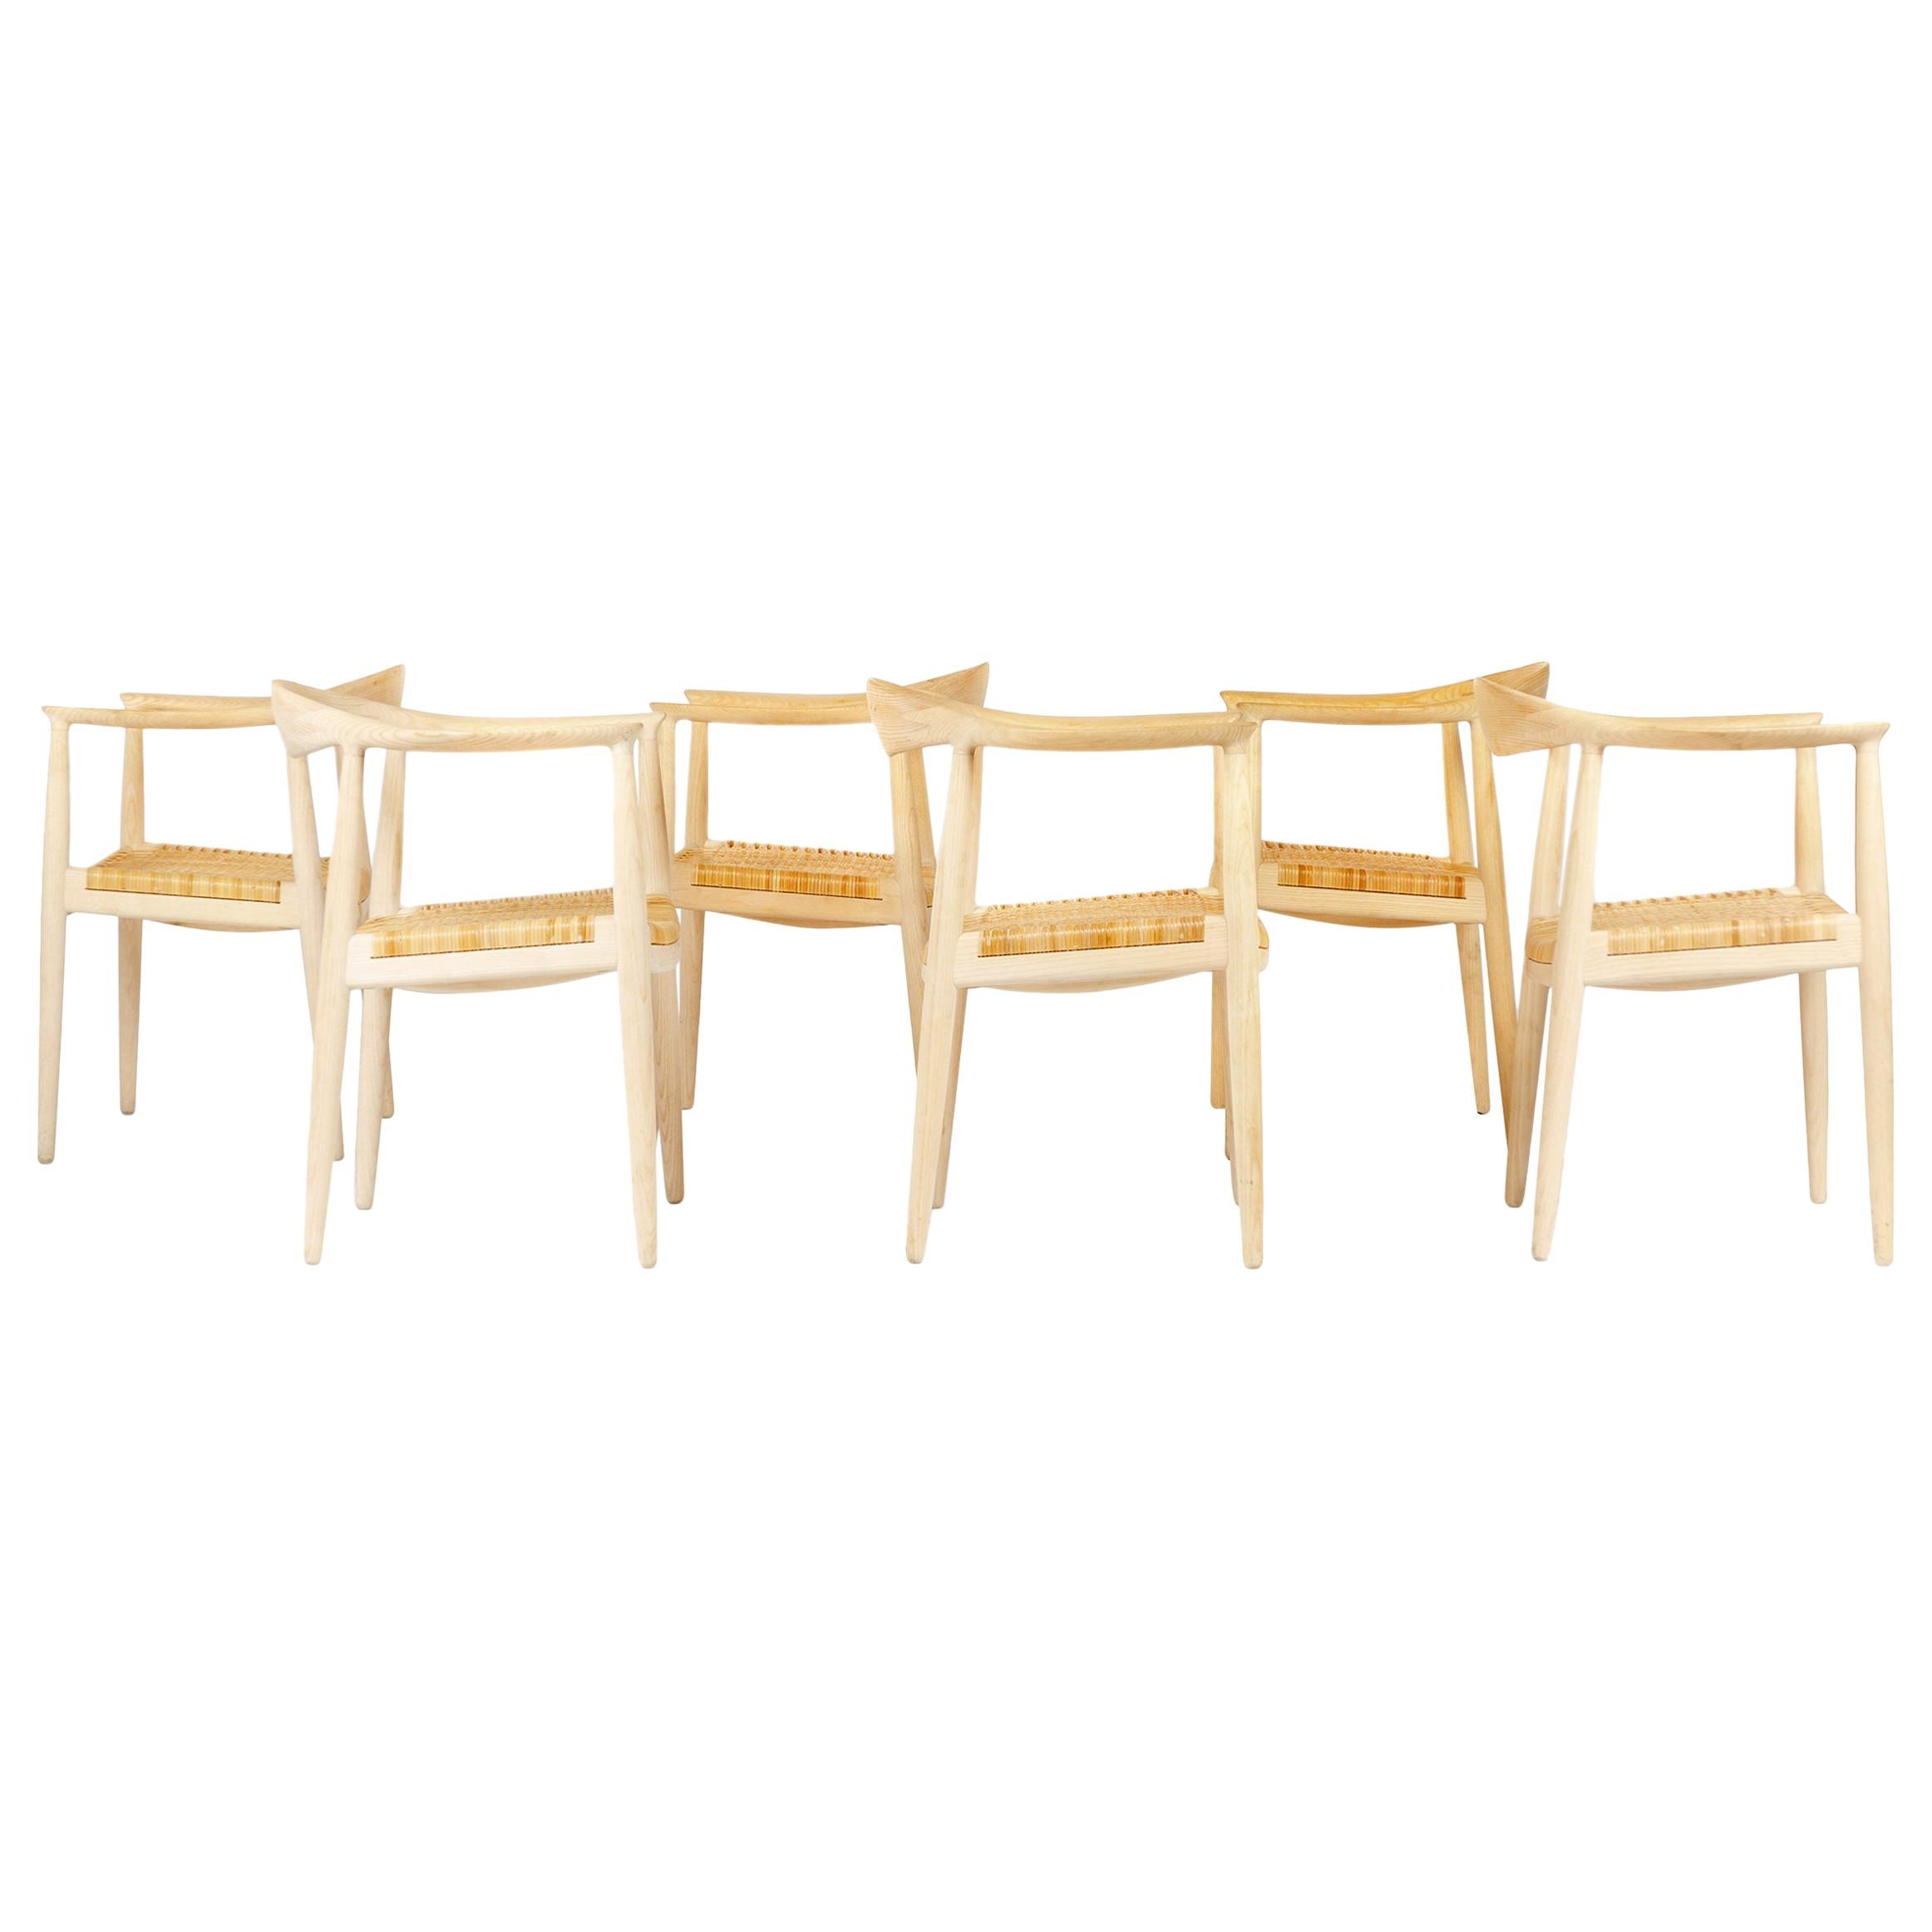 Set of 6 Danish PP501 Round Chairs in Ash by Hans J. Wegner for PP Møbler